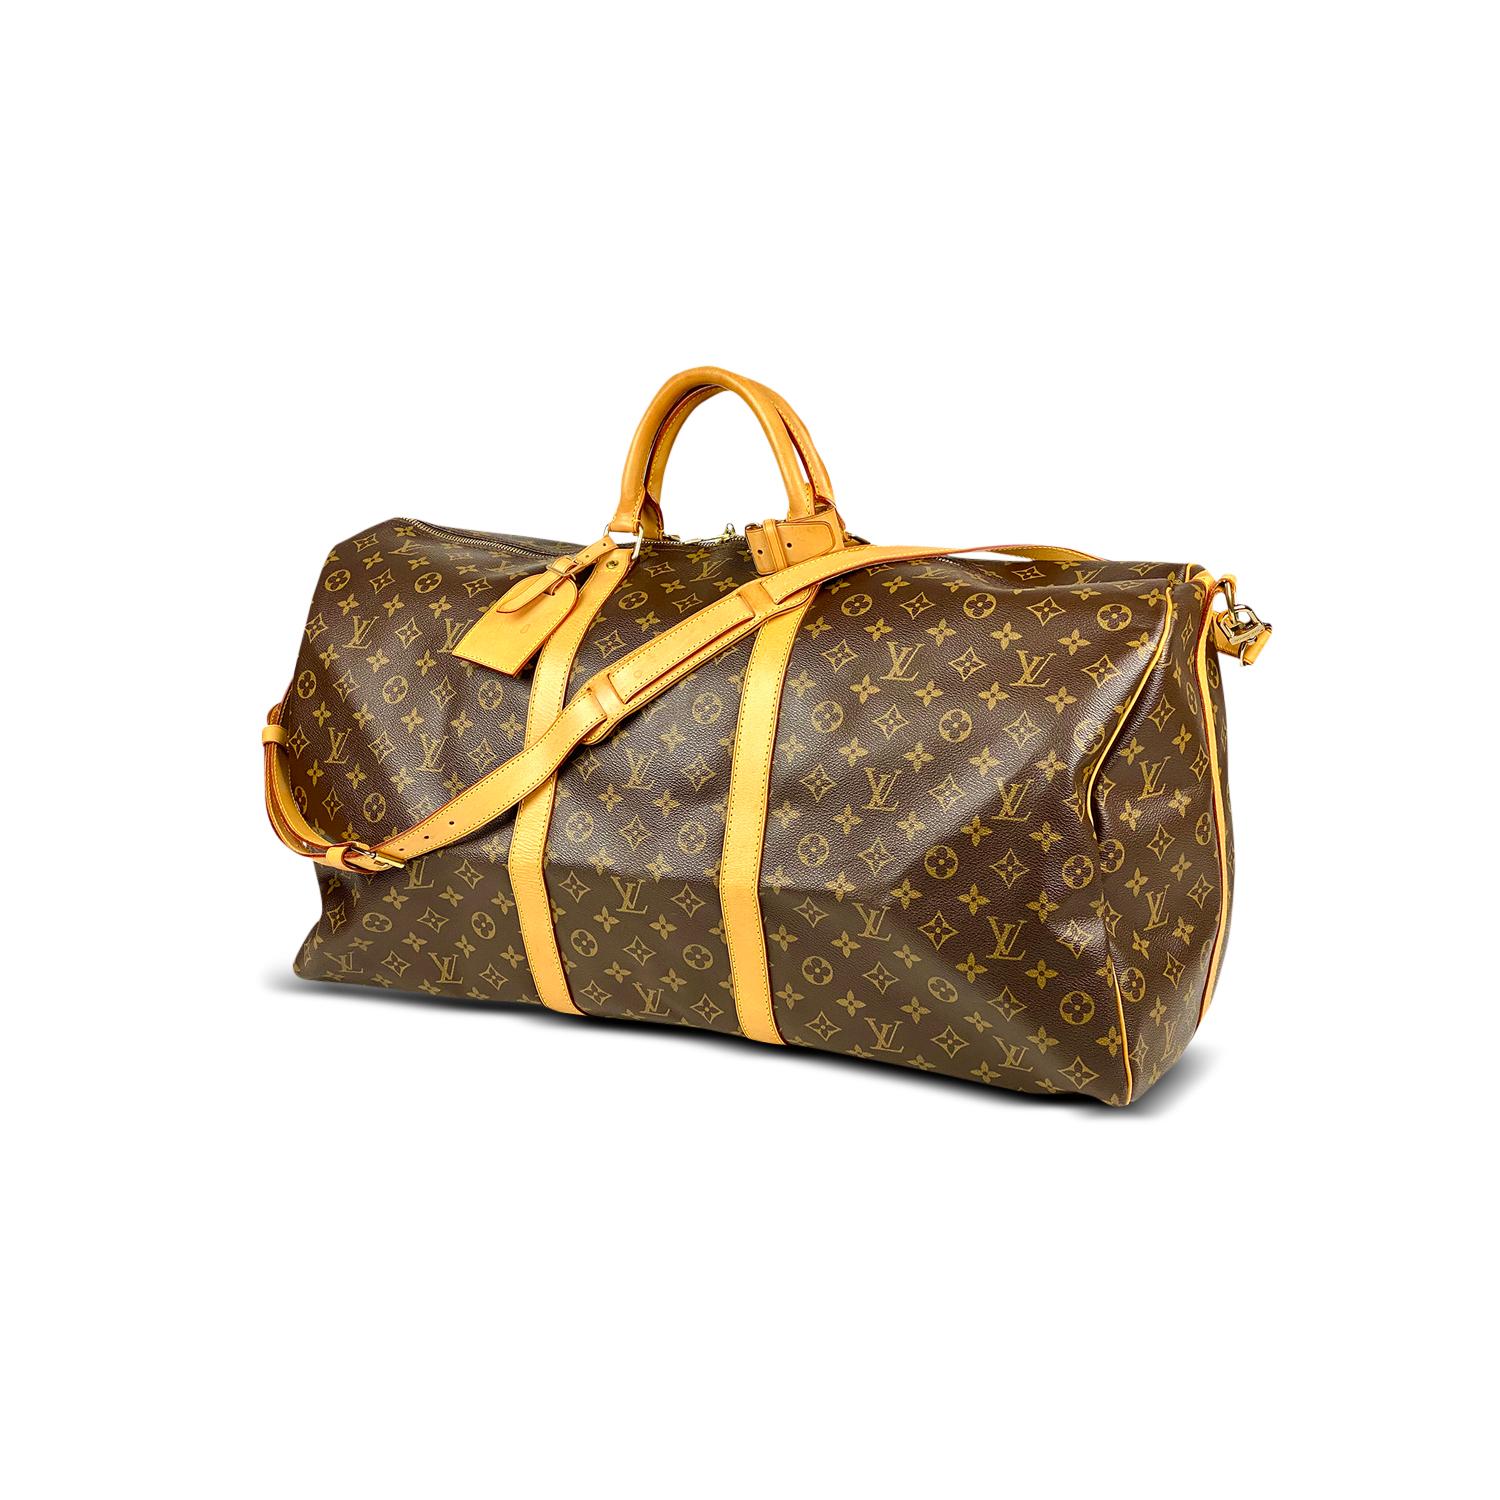 Brown and tan monogram coated canvas Louis Vuitton Keepall Bandoulière 60 with

- Brass hardware
- Tan vachetta leather trim
- Dual rolled top handles
- Tonal canvas lining and two-way zip closure at top

Overall Preloved Condition: Very